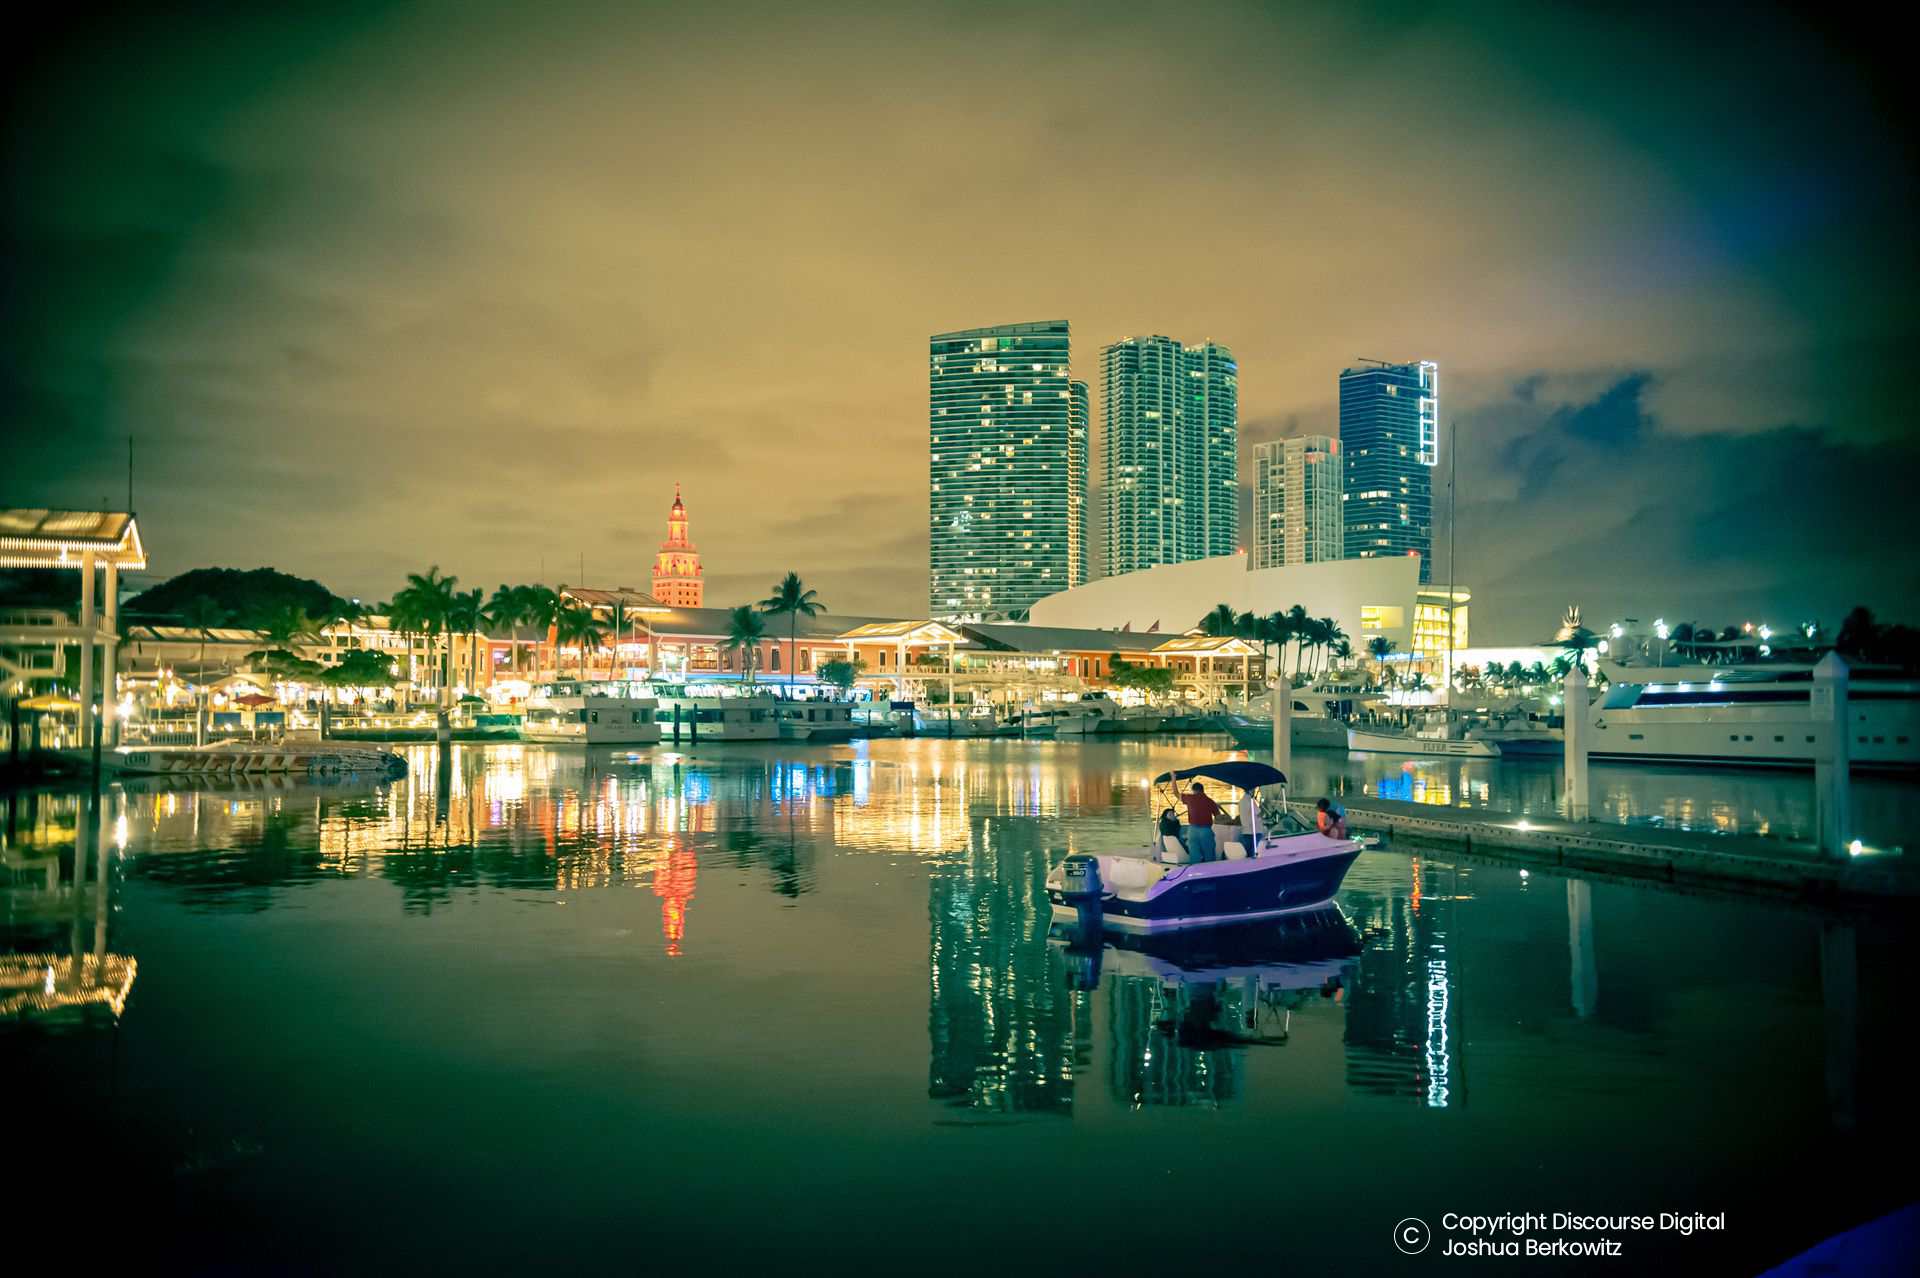 Miami waterfront with a large variety of commercial lighting